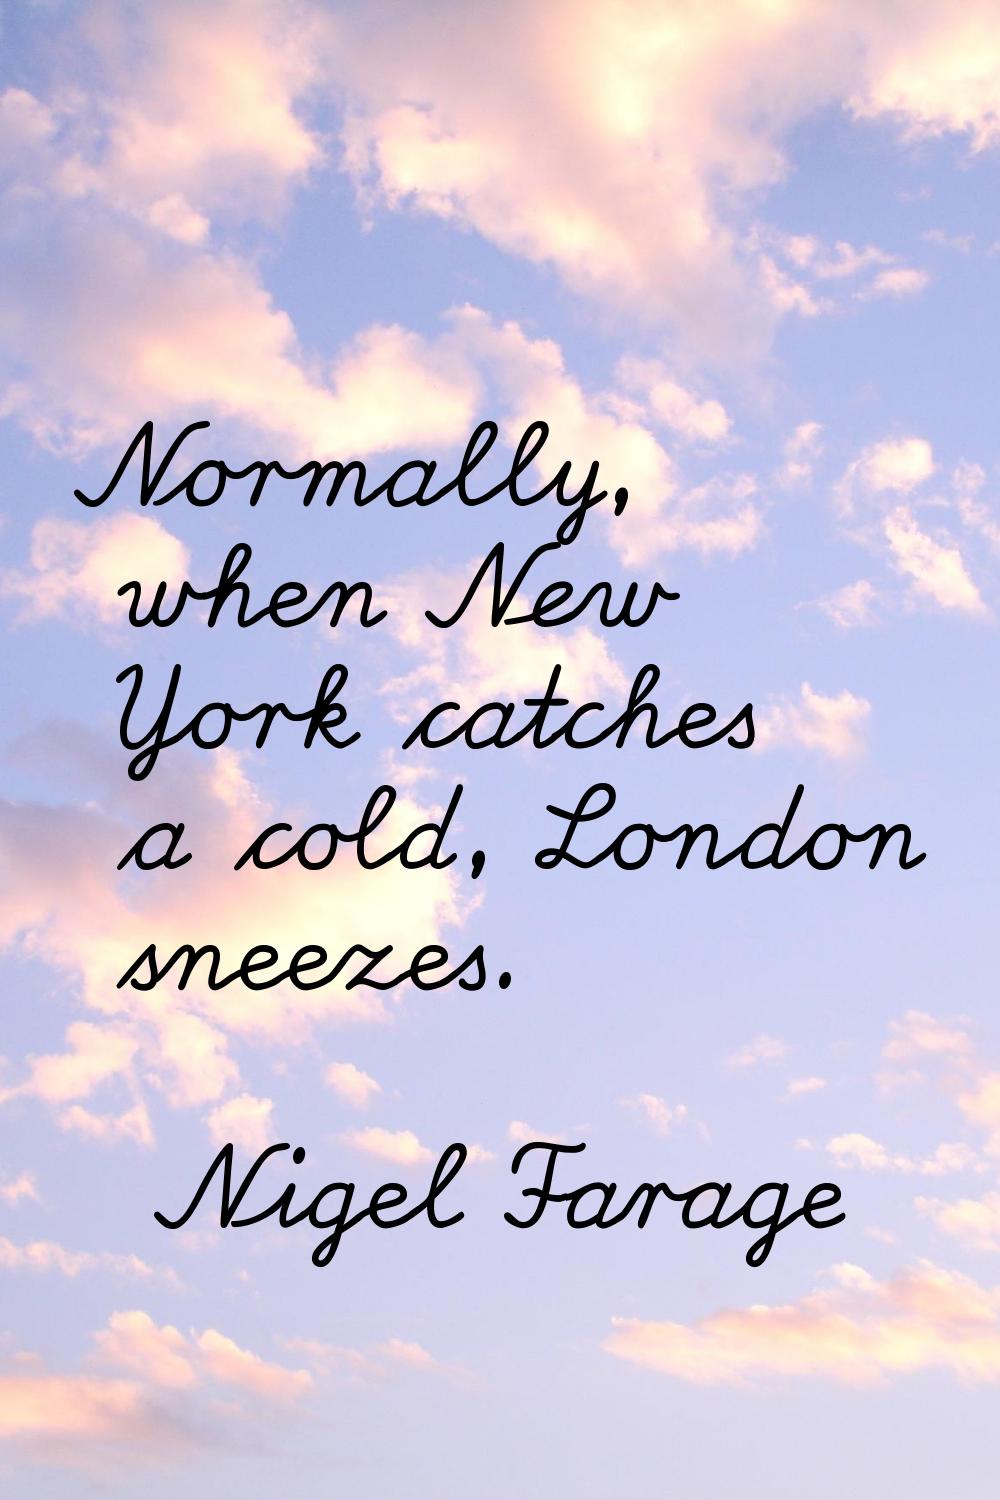 Normally, when New York catches a cold, London sneezes.